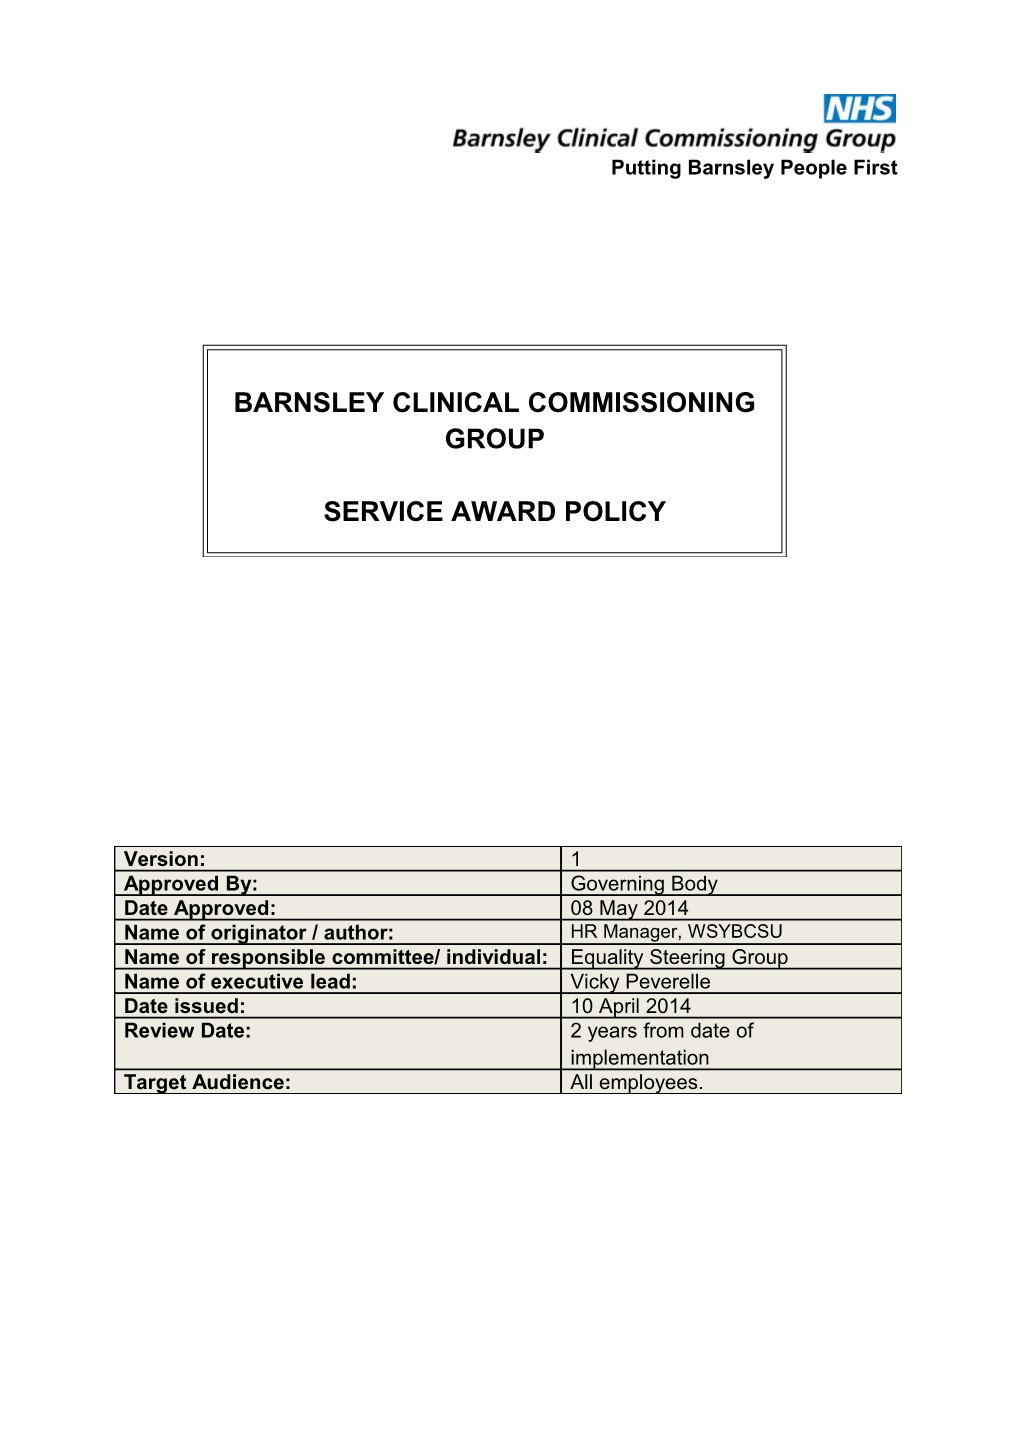 Barnsley Clinical Commissioning Group S Service Award Policy